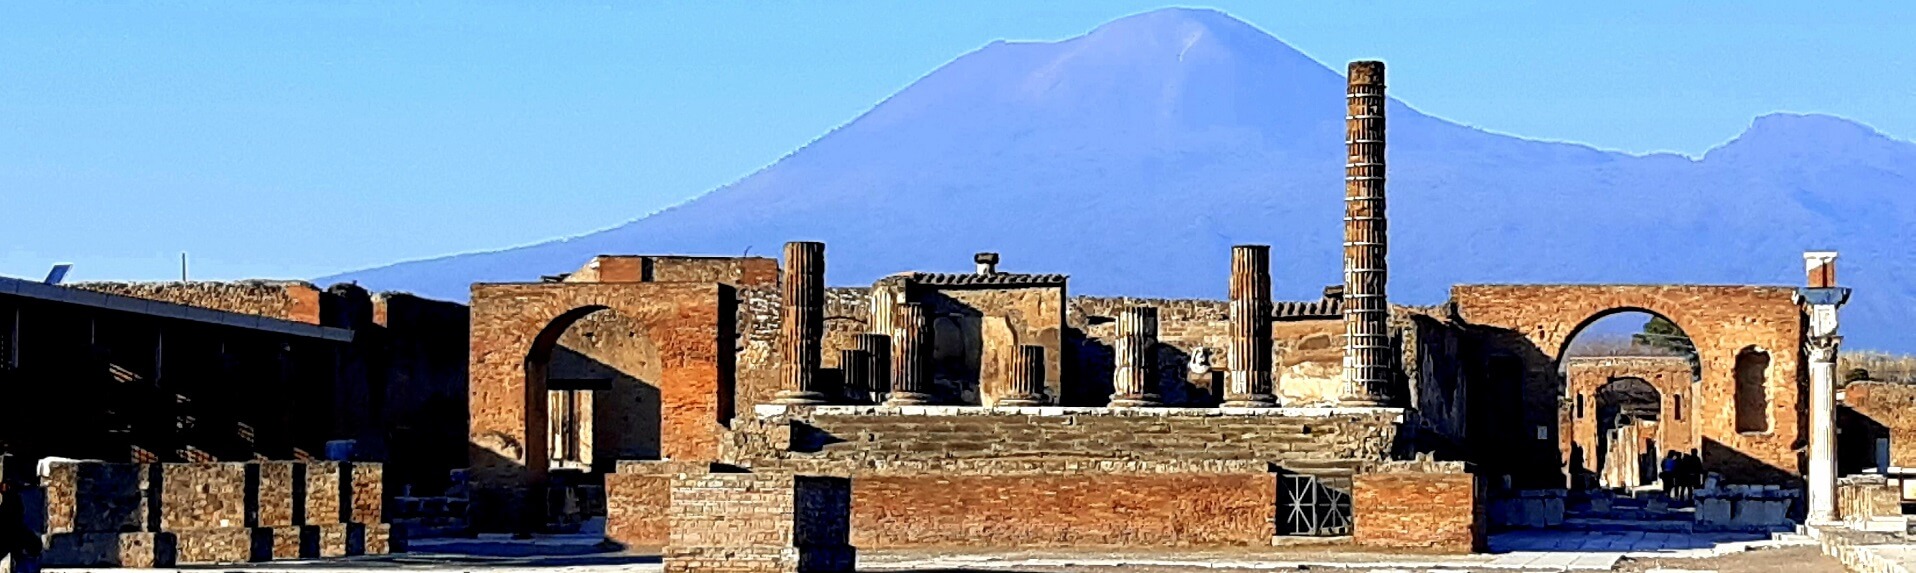 Do you need a guided tour of Pompeii?